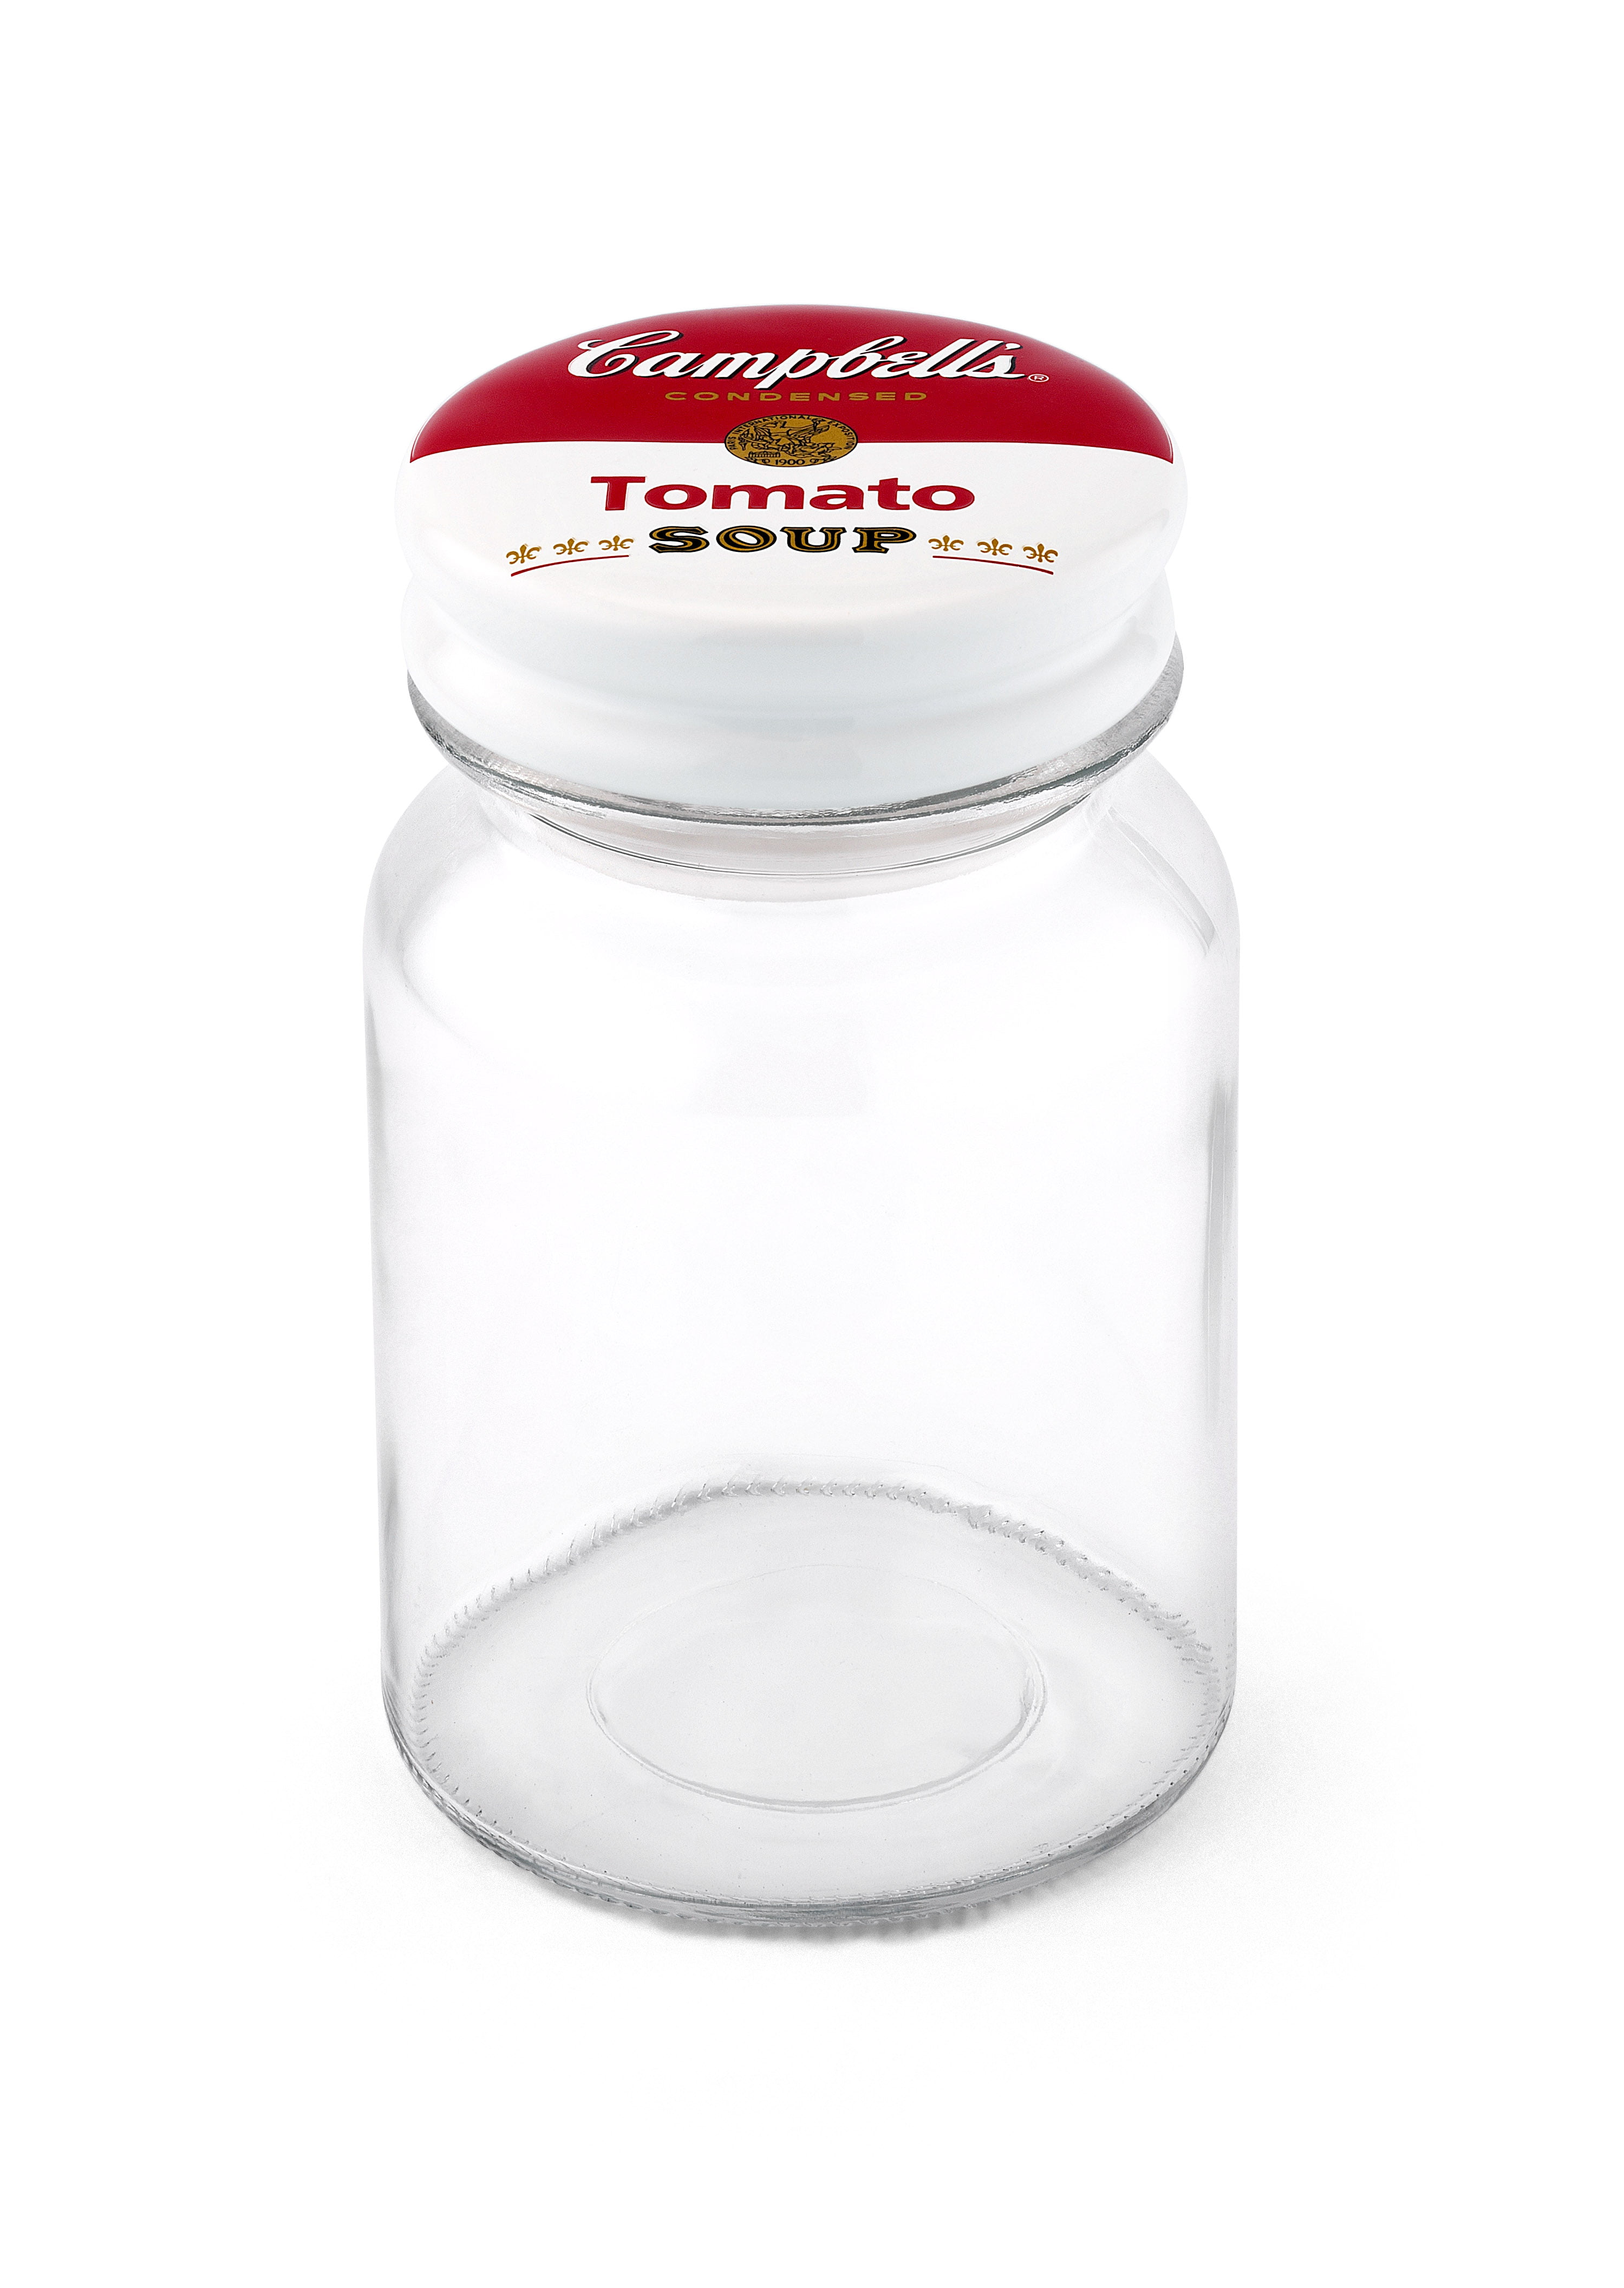 Campbell's 28oz Glass Canister with Decorated Ceramic Lid Wmt-l271b